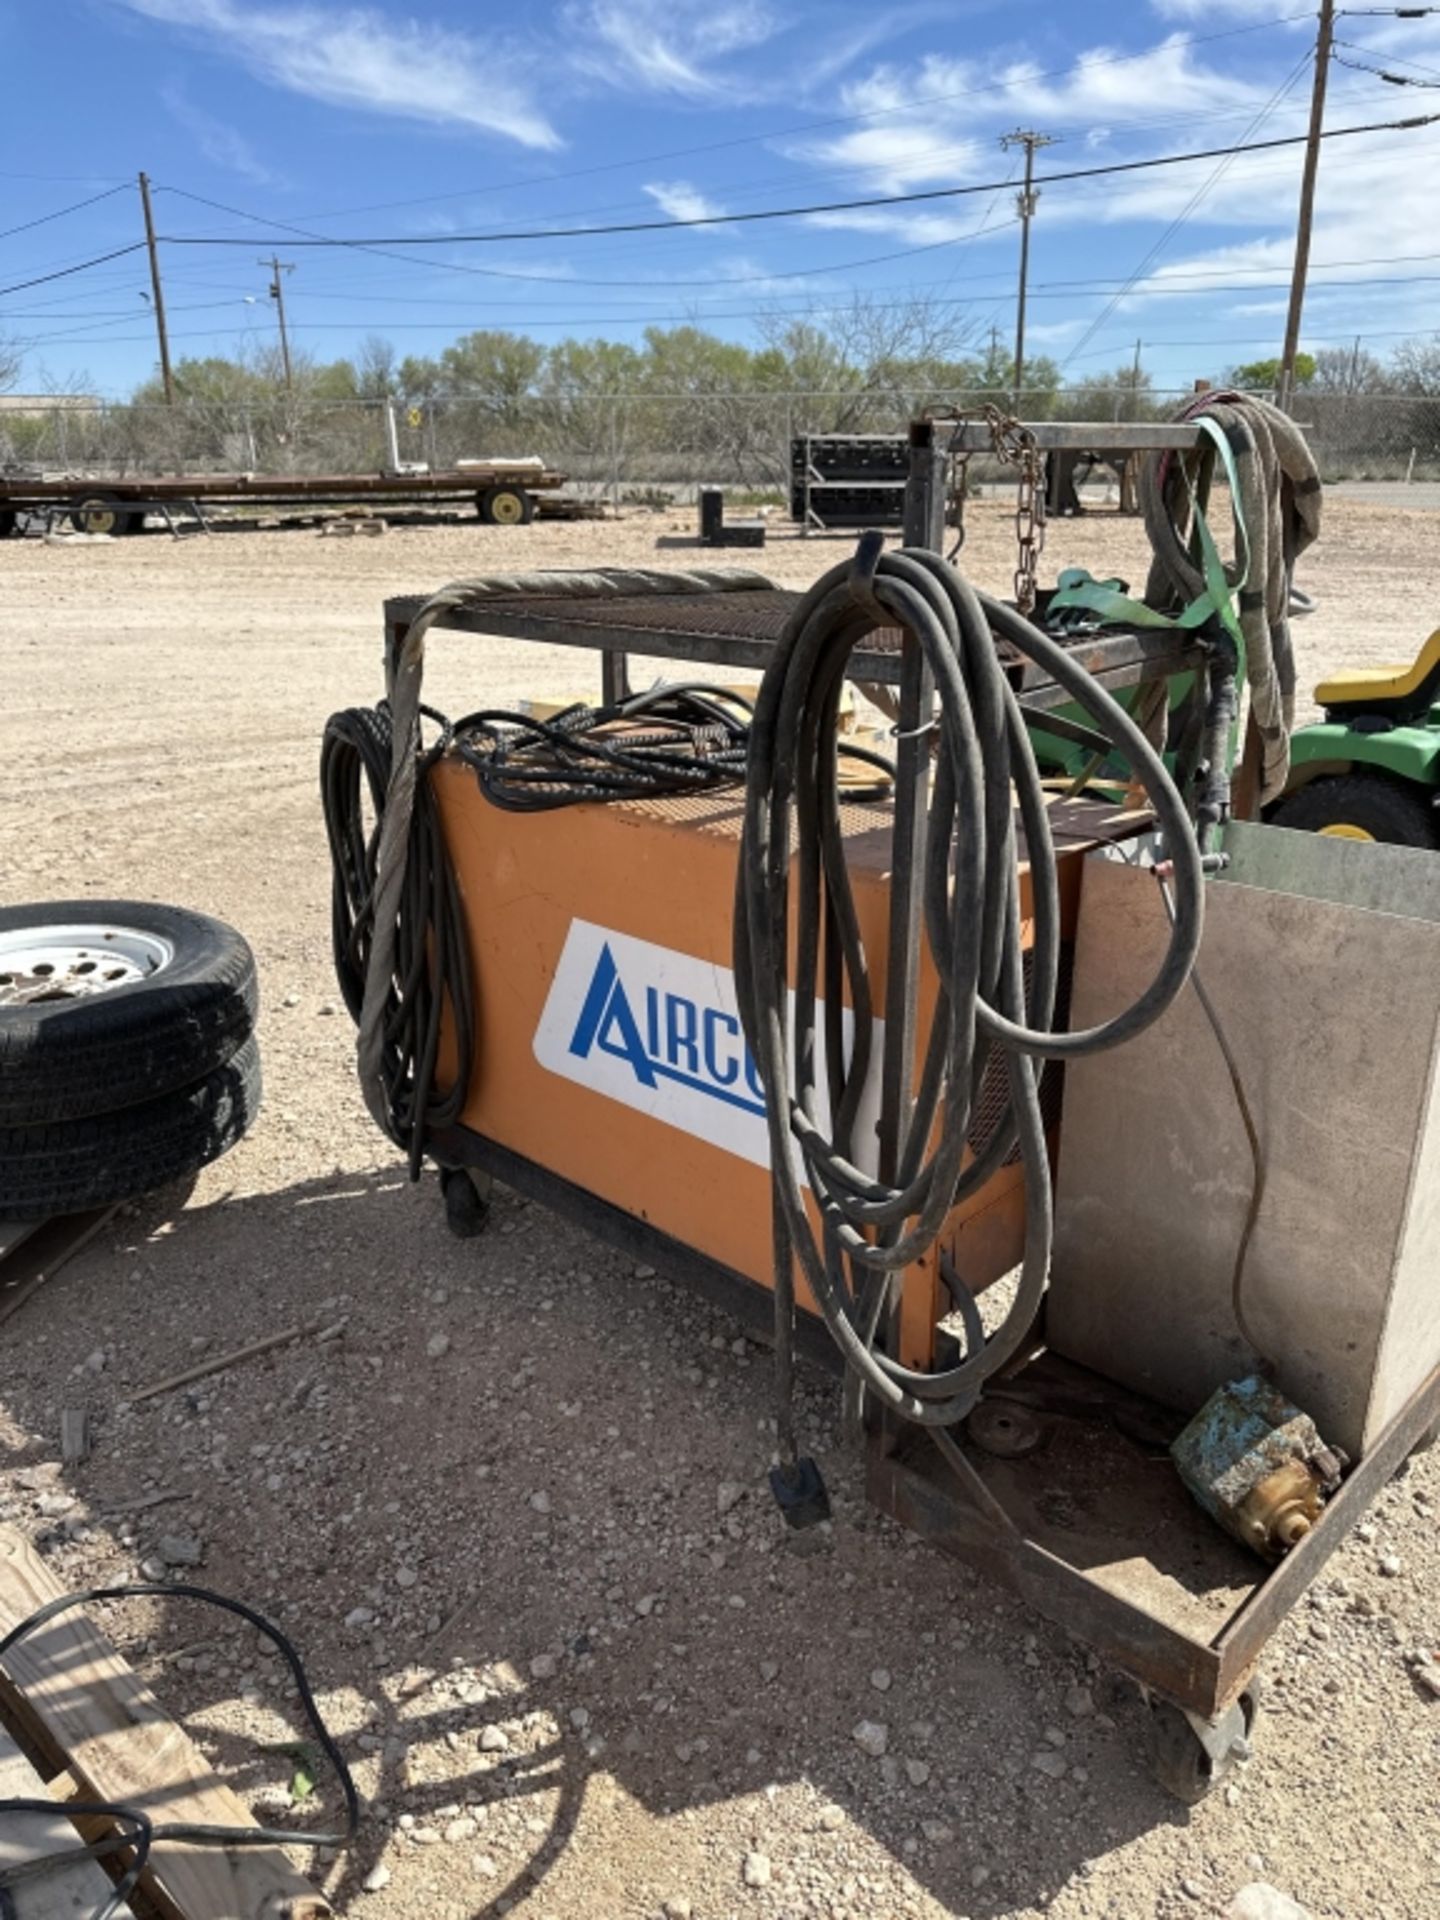 Airco welder - Image 11 of 12